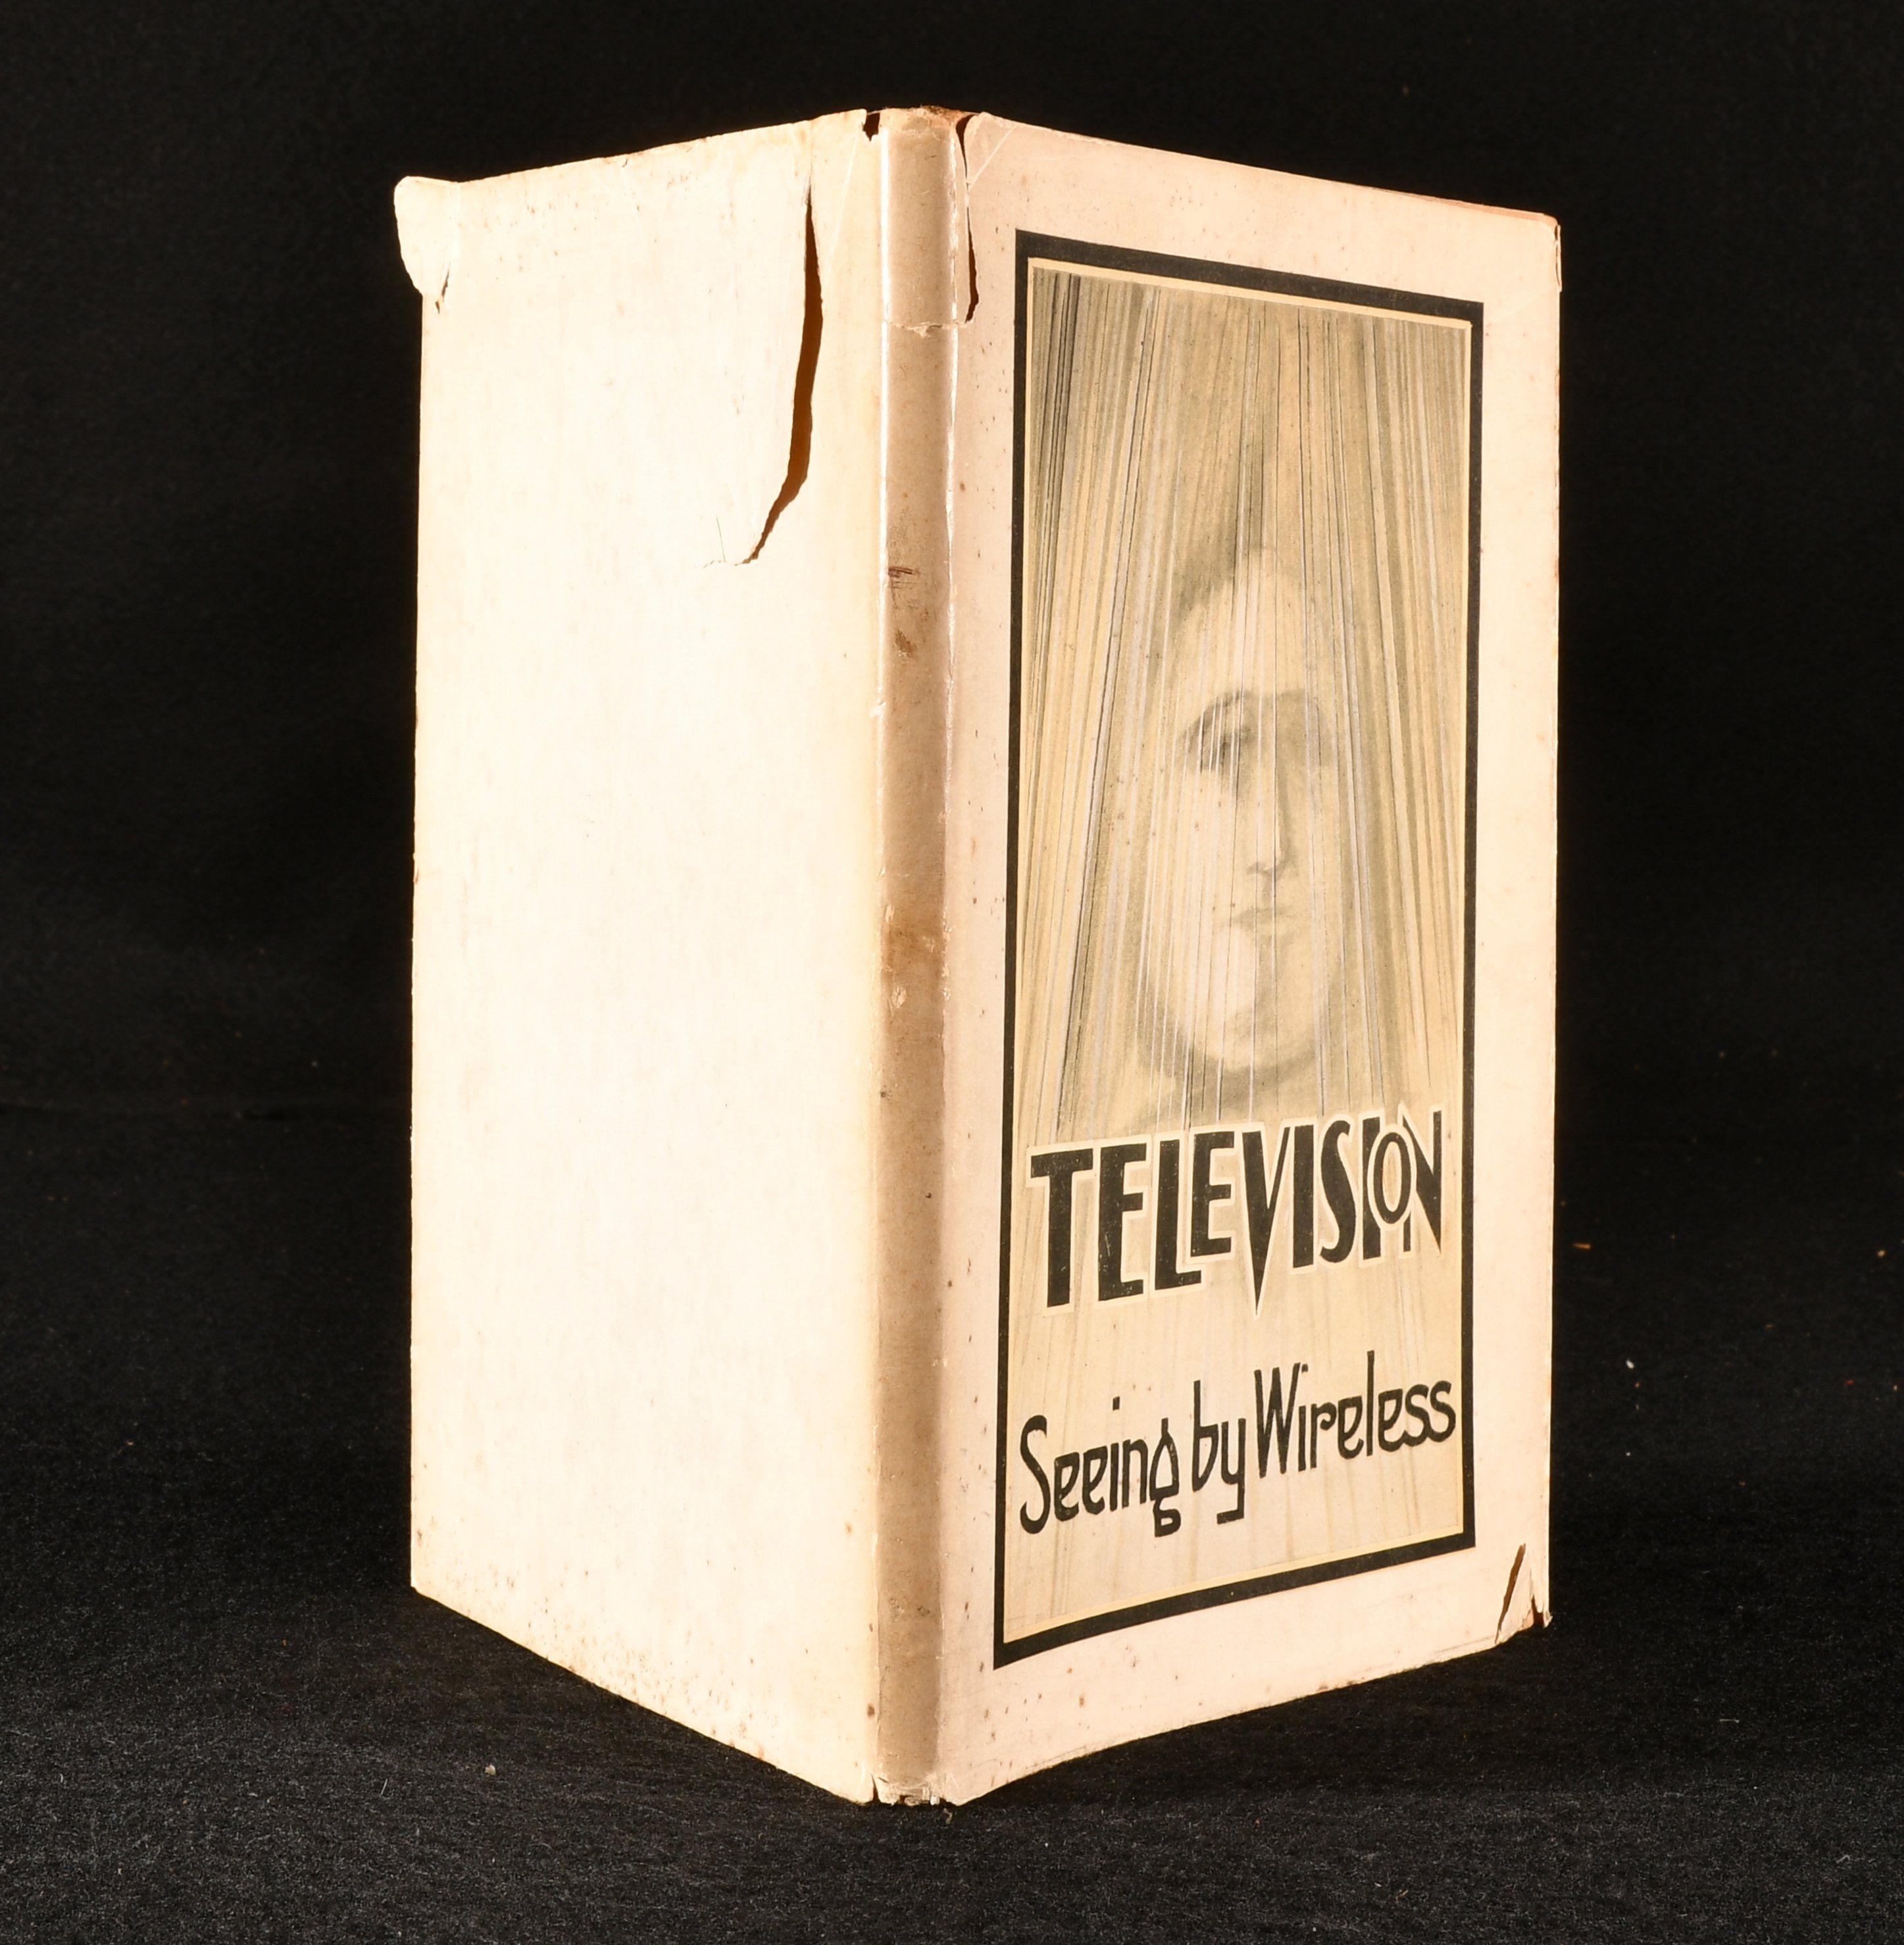 A scarce, first edition copy of this important work on television. This was the first book in English on television, and Dinsdale discusses the timeline and technical challenges of the technological marvel.

With the very scarce original unclipped